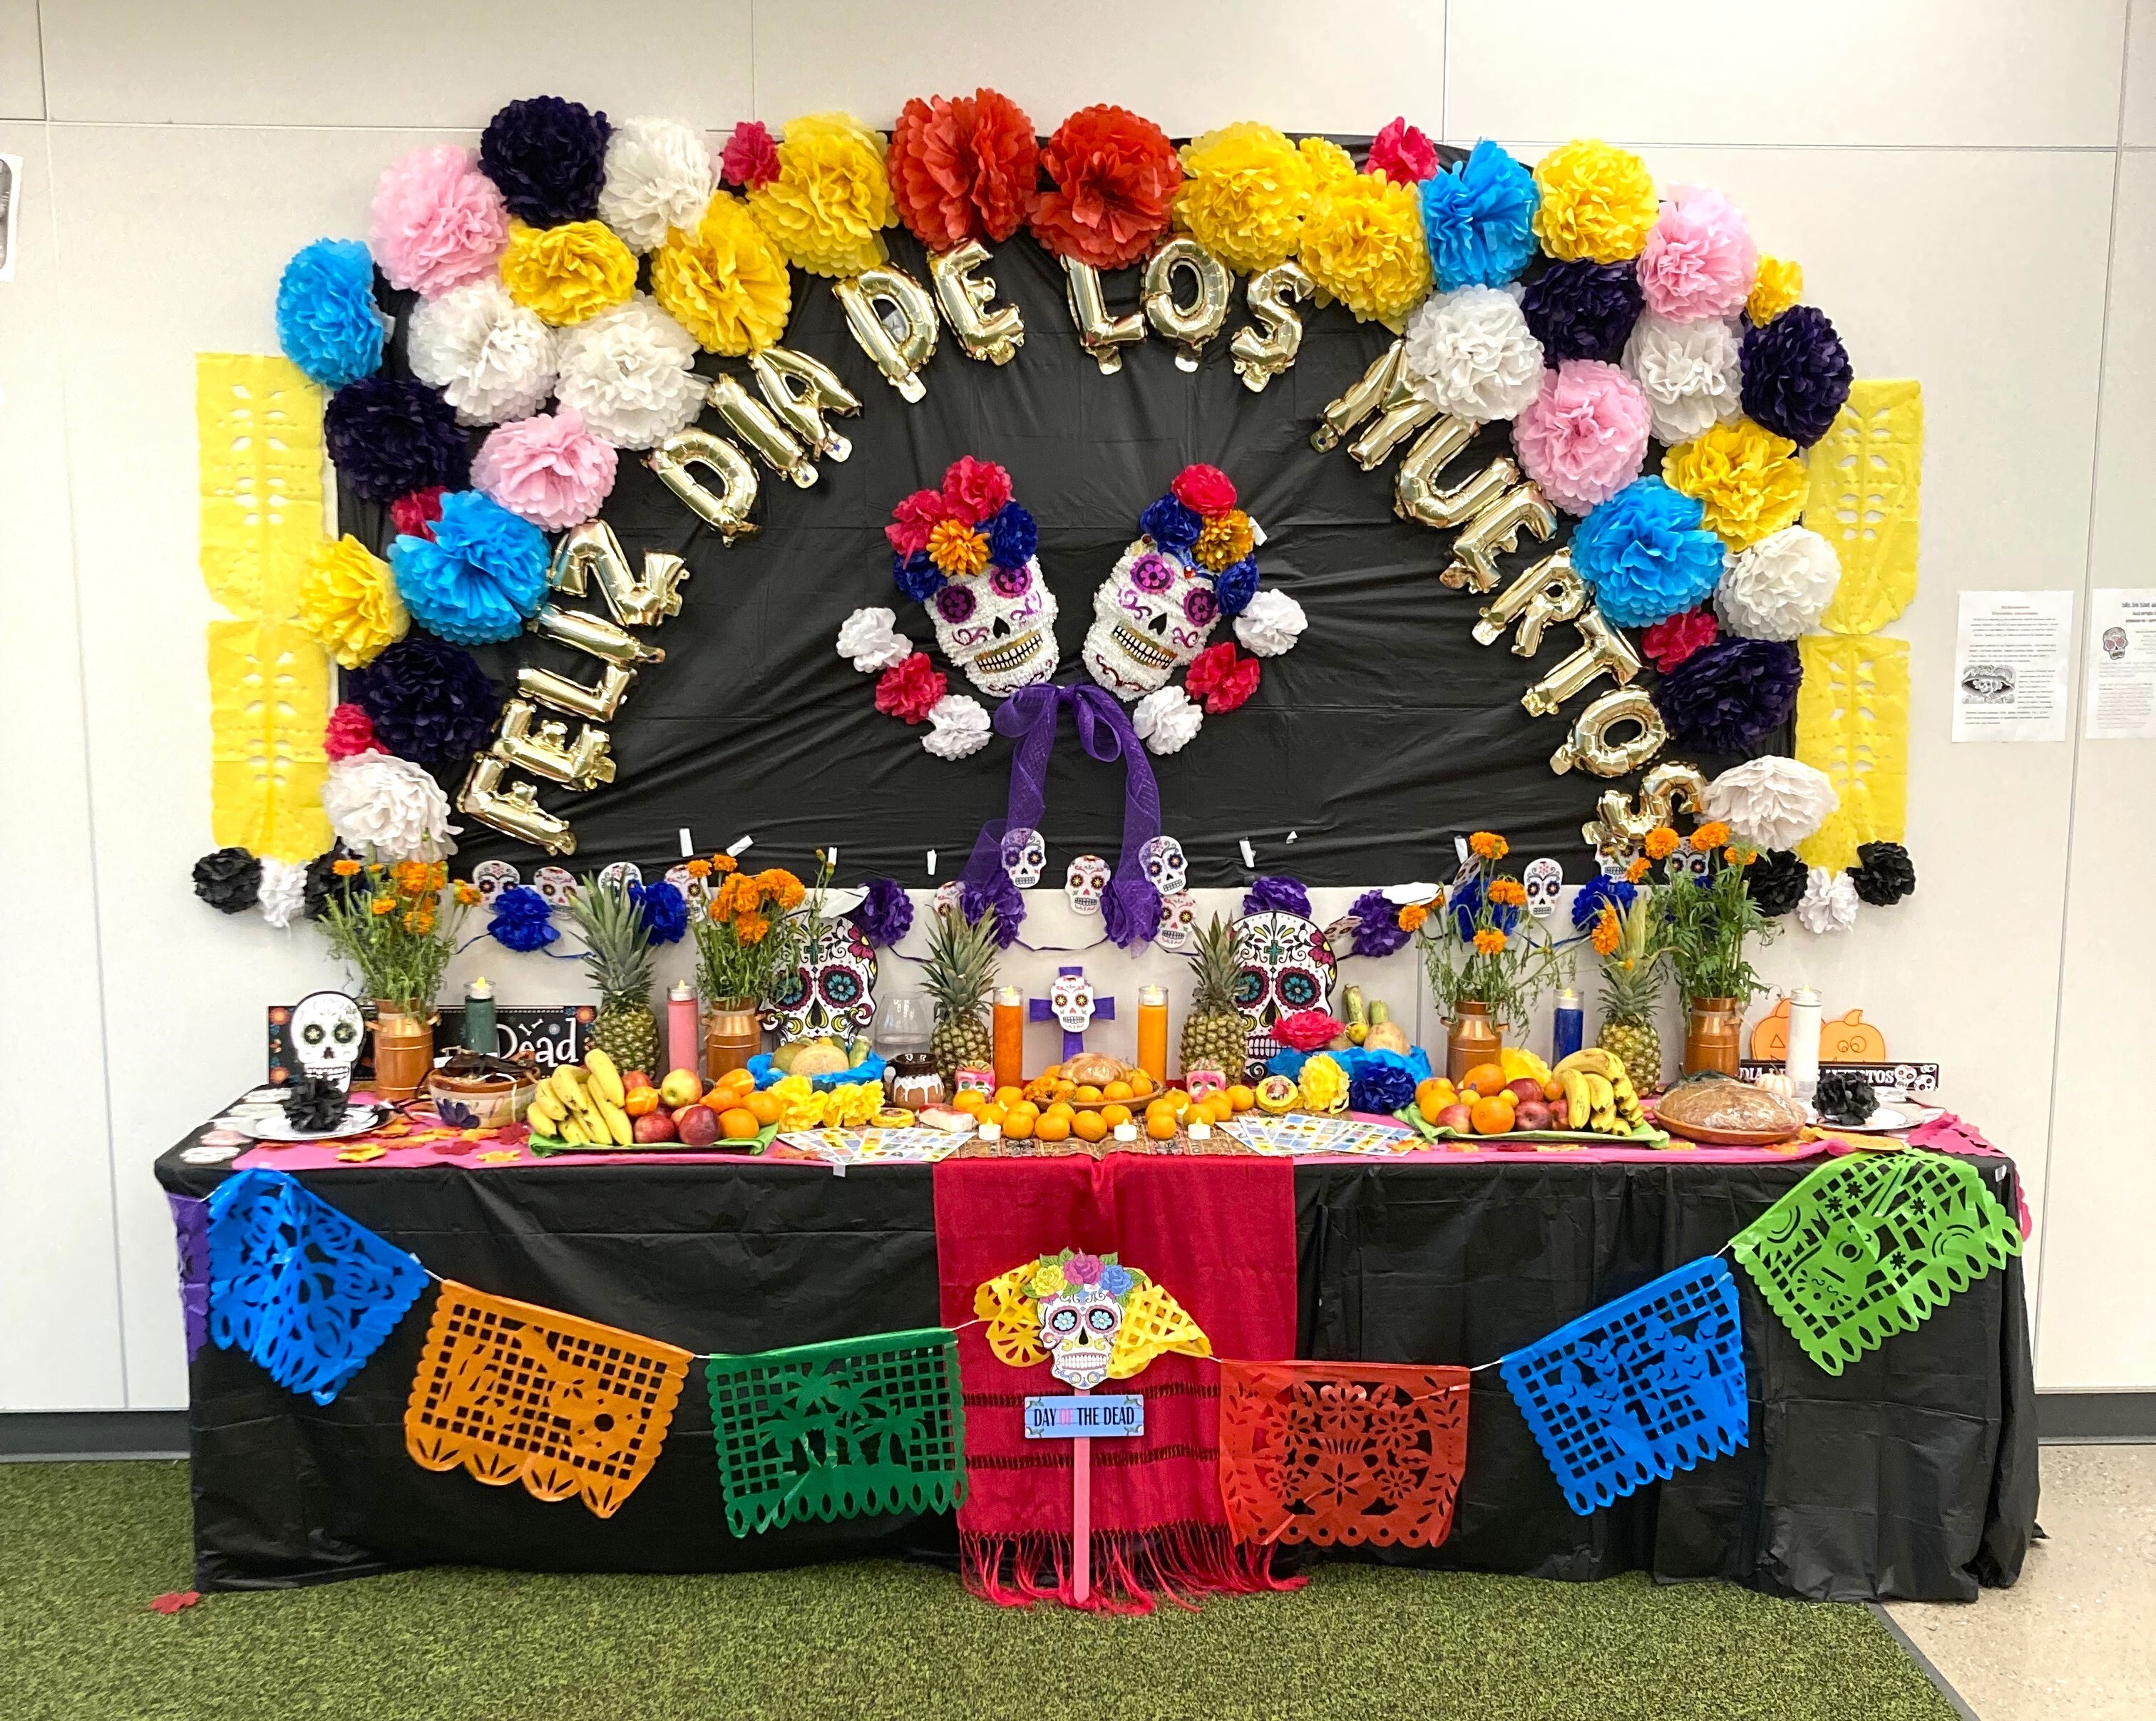 An altar at Southwest Middle High School - Academia Bilingüe for the Day of the Dead or Día de los Muertos, a holiday that originated in Mexico and is usually observed on November 1 and 2 as a way to honor, celebrate and pay respect to family members who have passed away.